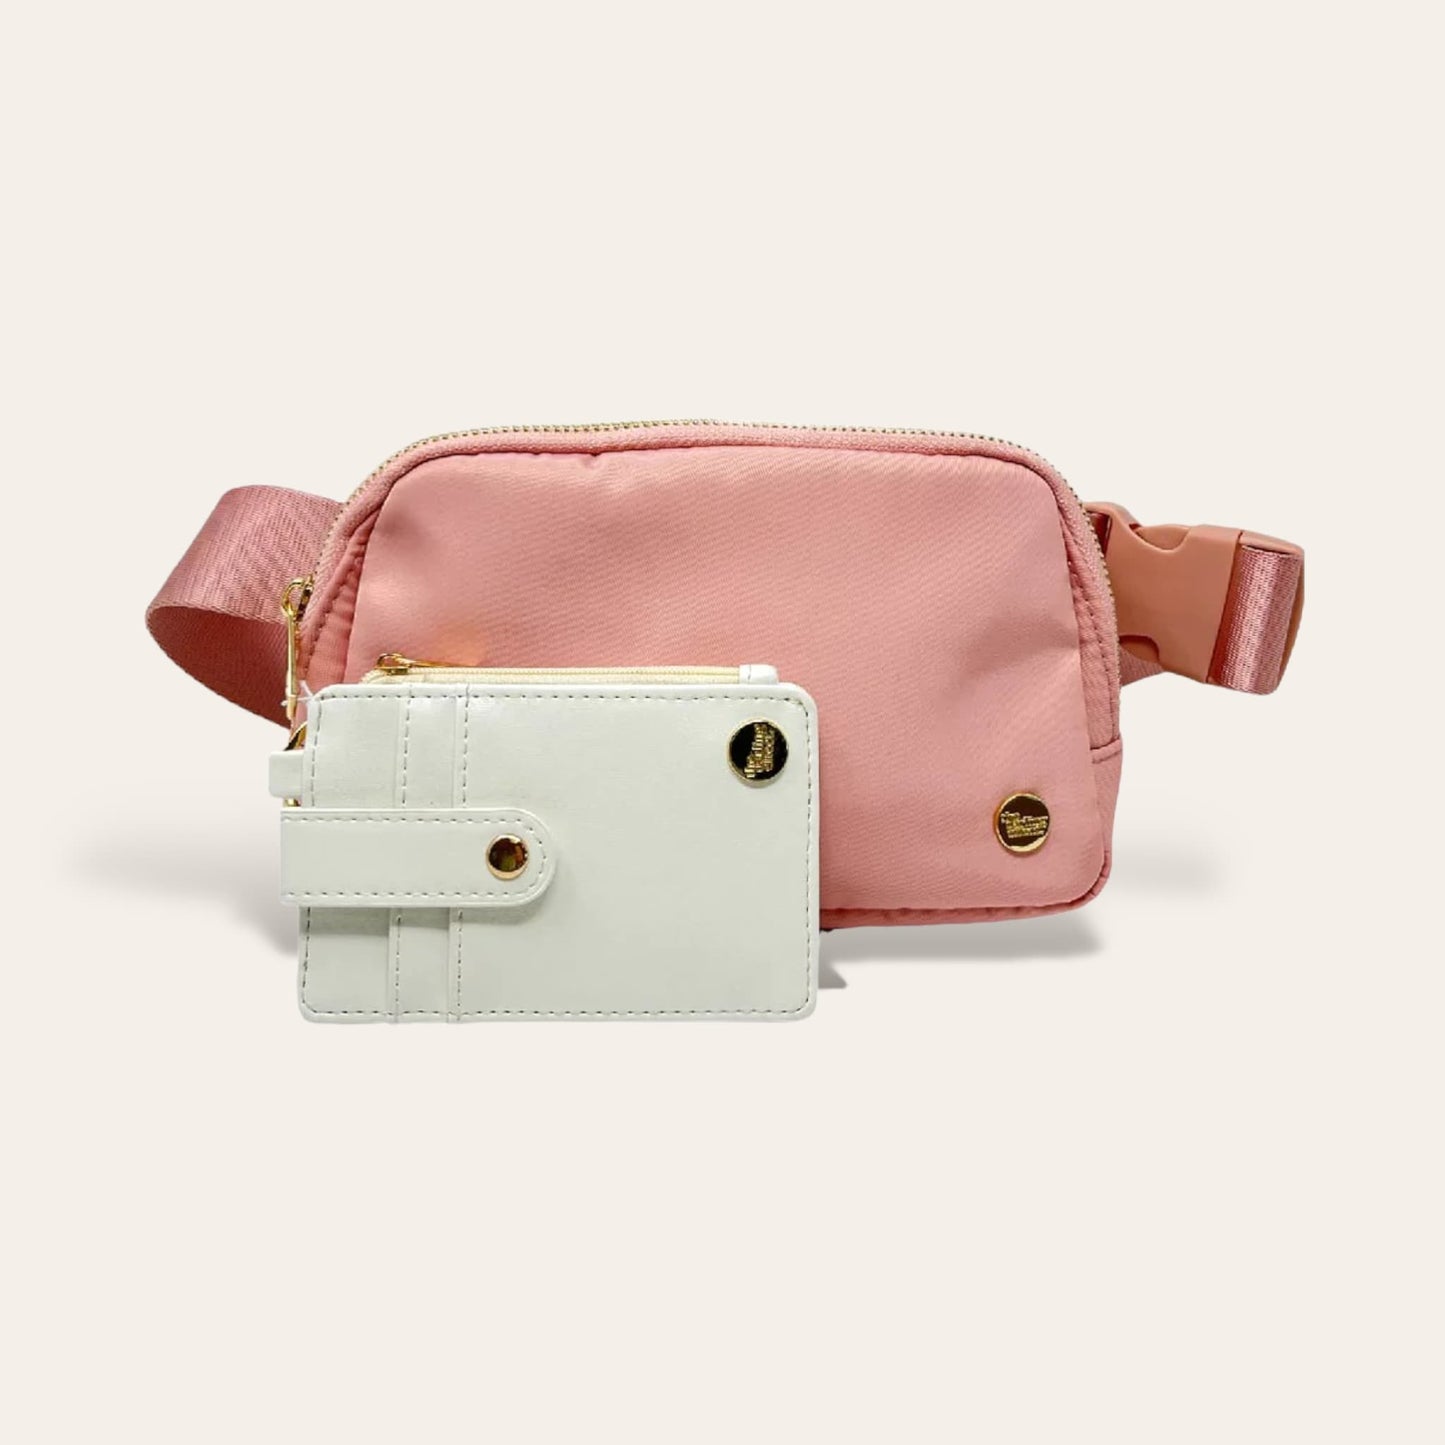 All You Need Belt Bag + Wallet - Dusty Blush